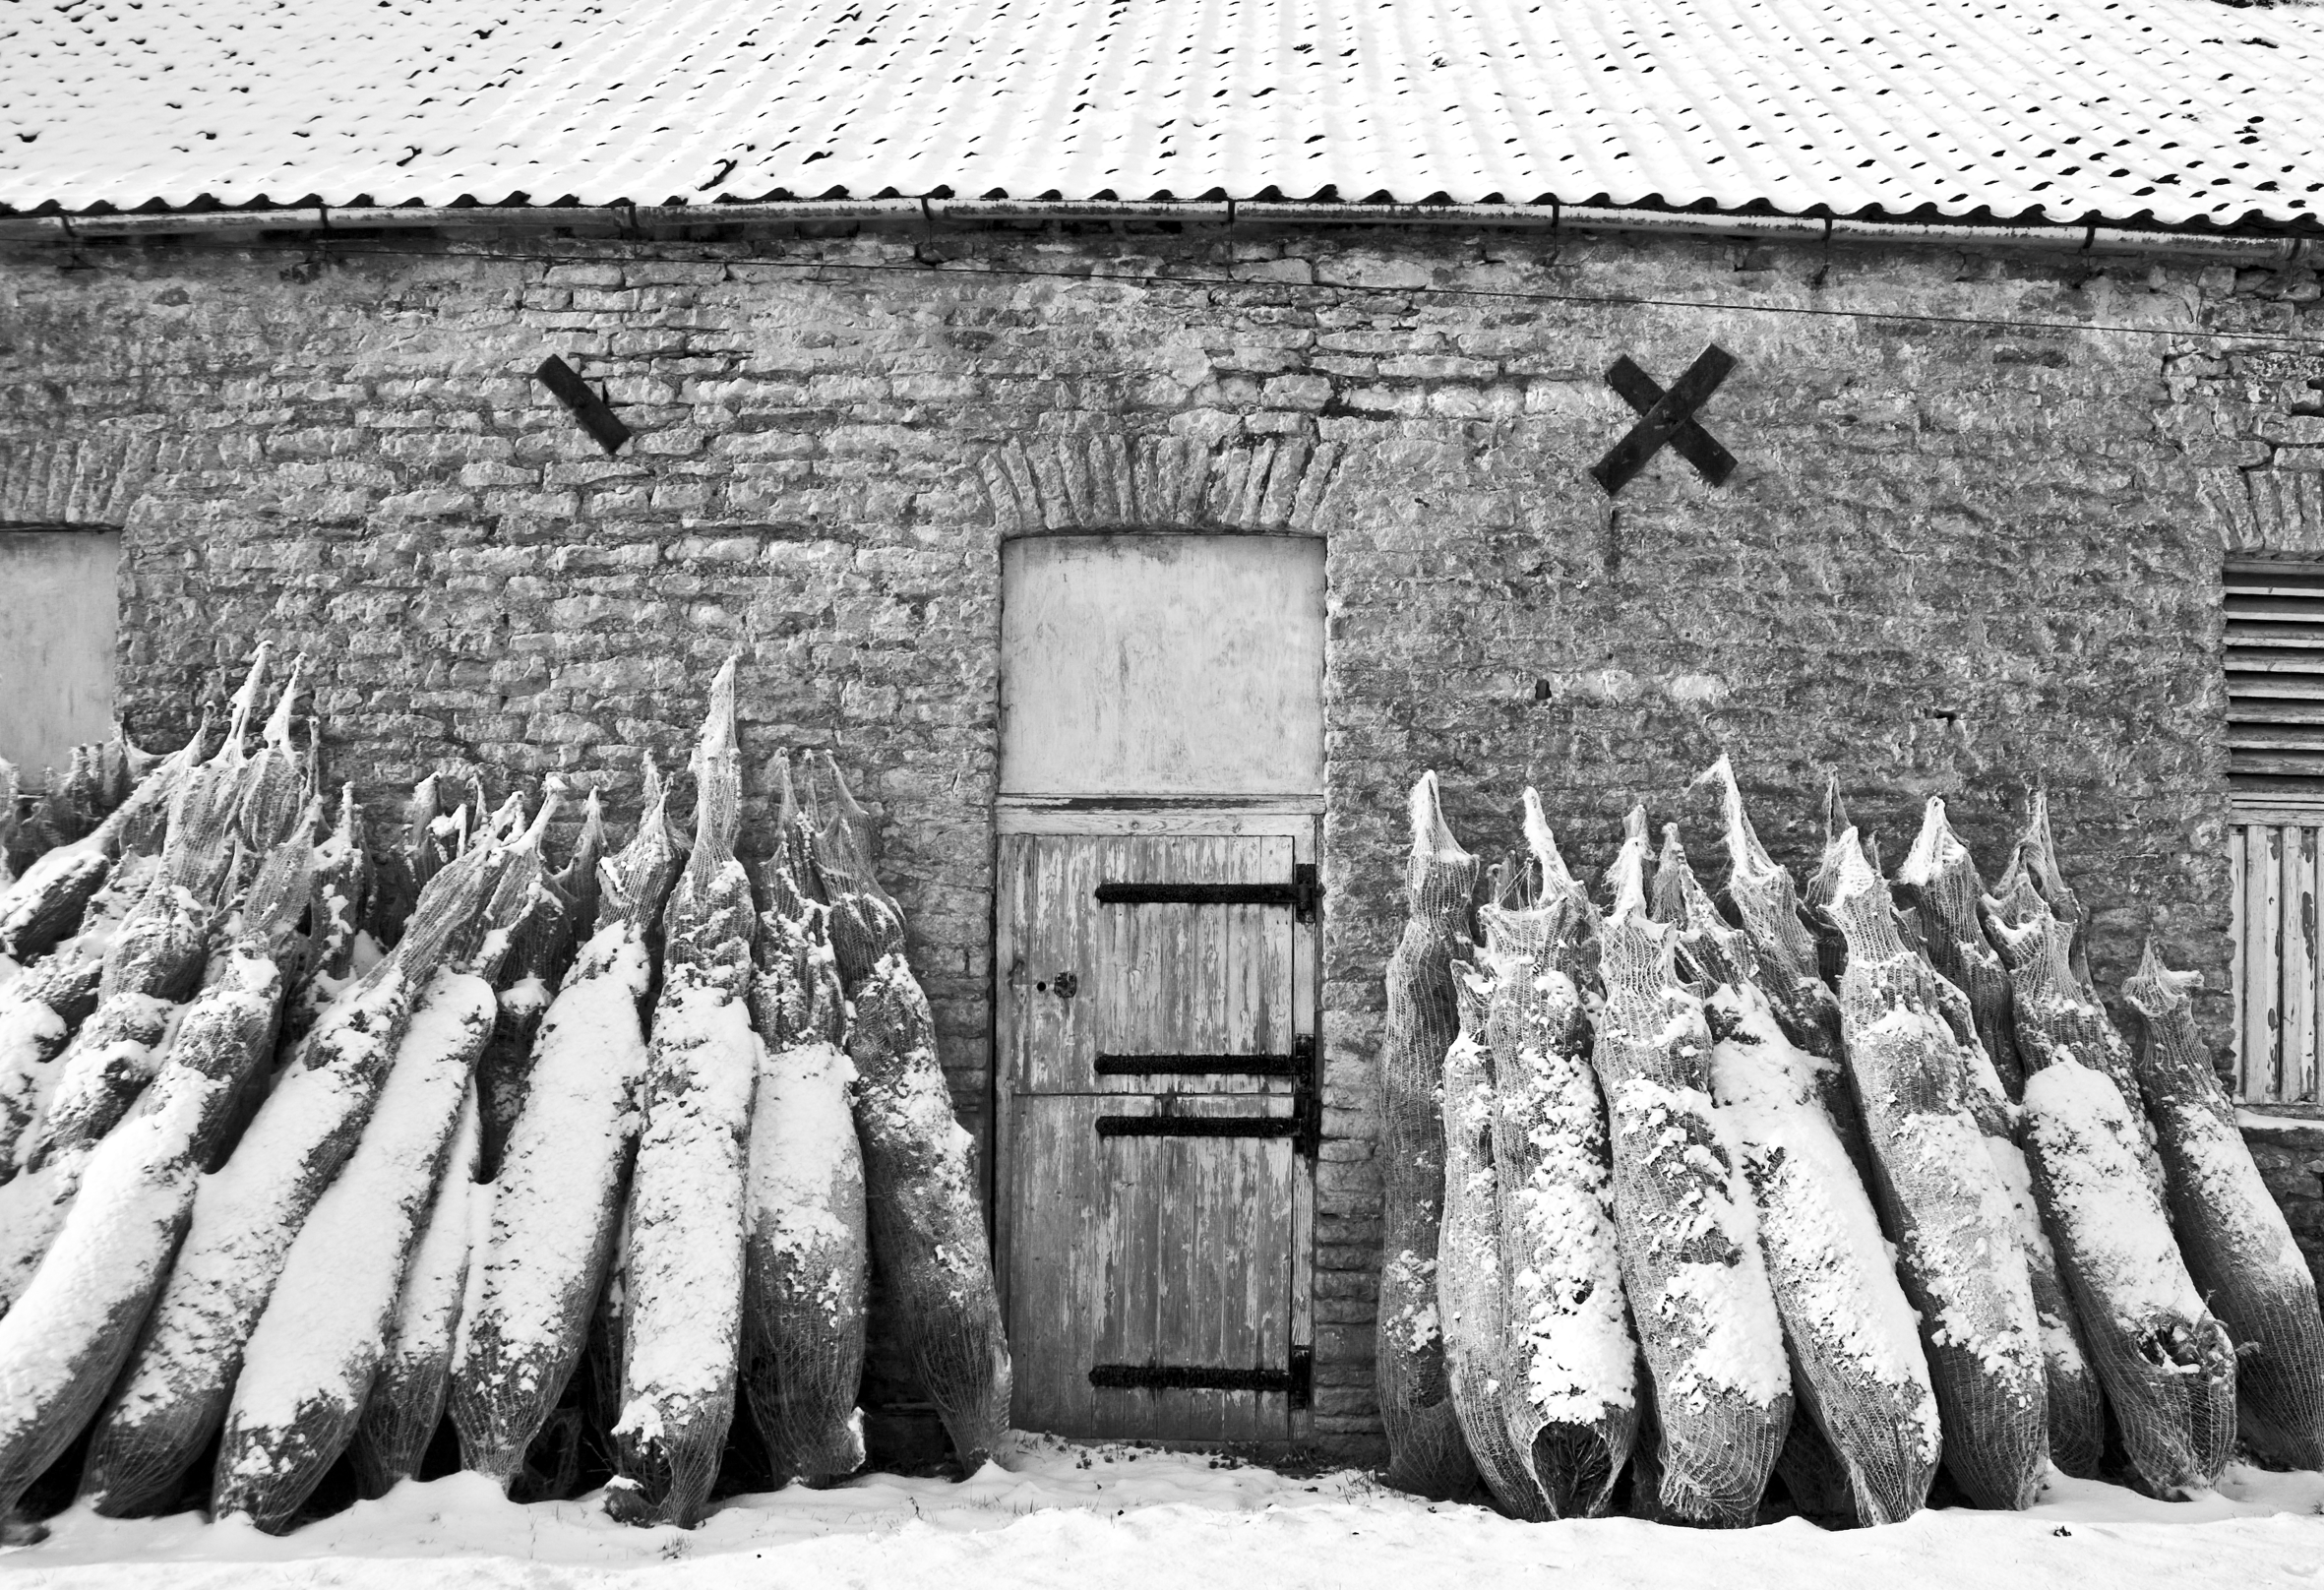 Black and white image of wrapped Christmas trees against the building outside.